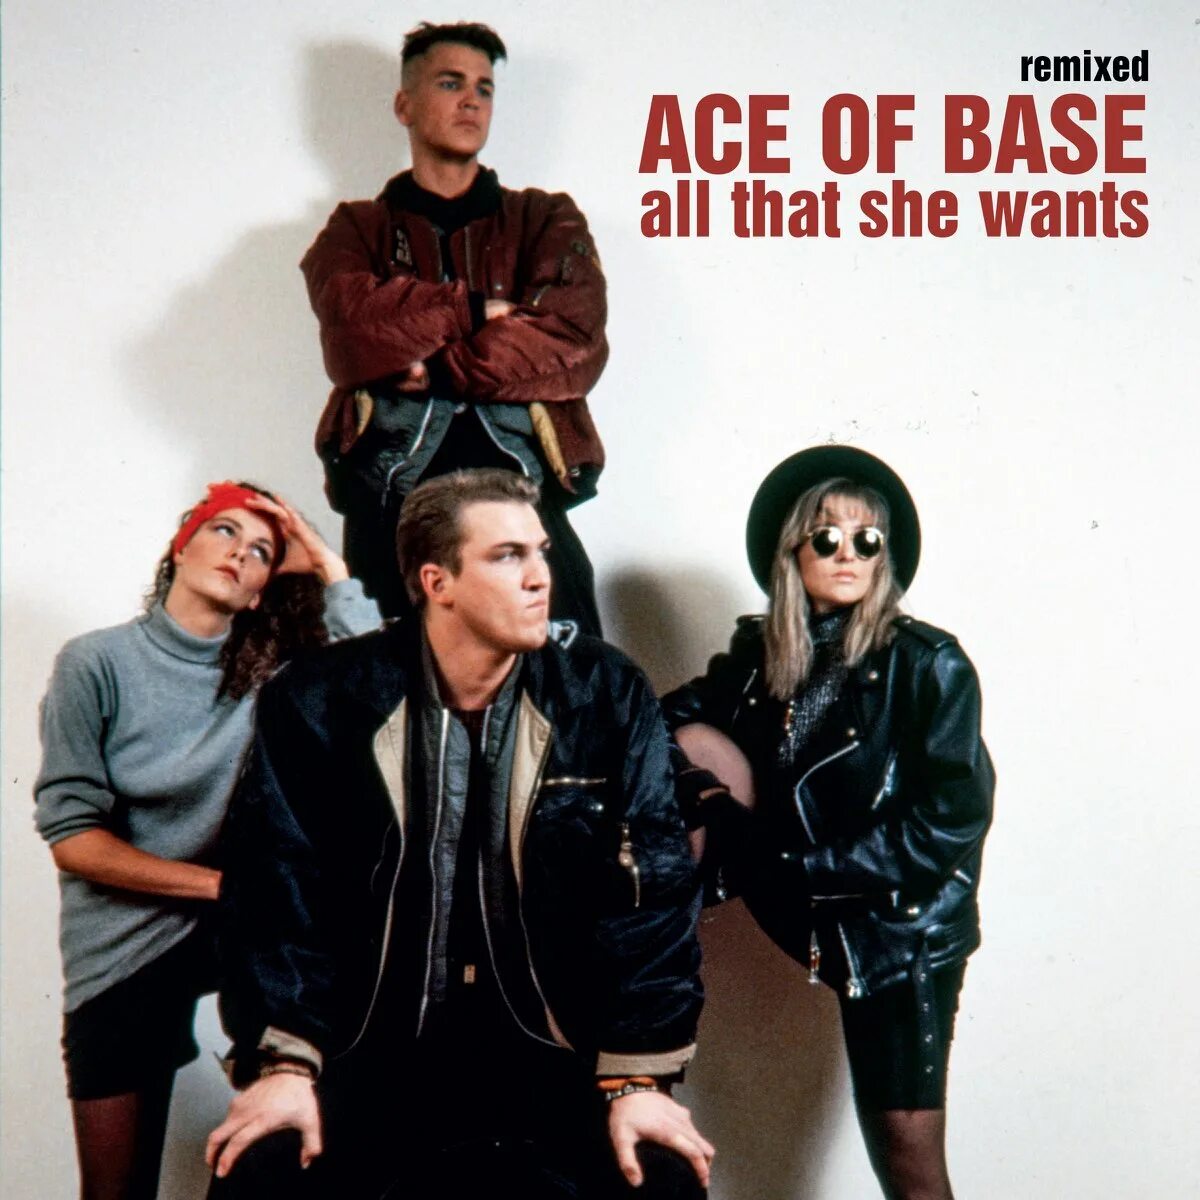 Mandee feat ace of base. Ace of Base all that she wants обложка. Ace of Base all that she wants альбом. Ace of Base Ace of Base - all that she wants. Ace of Base обложки альбомов.